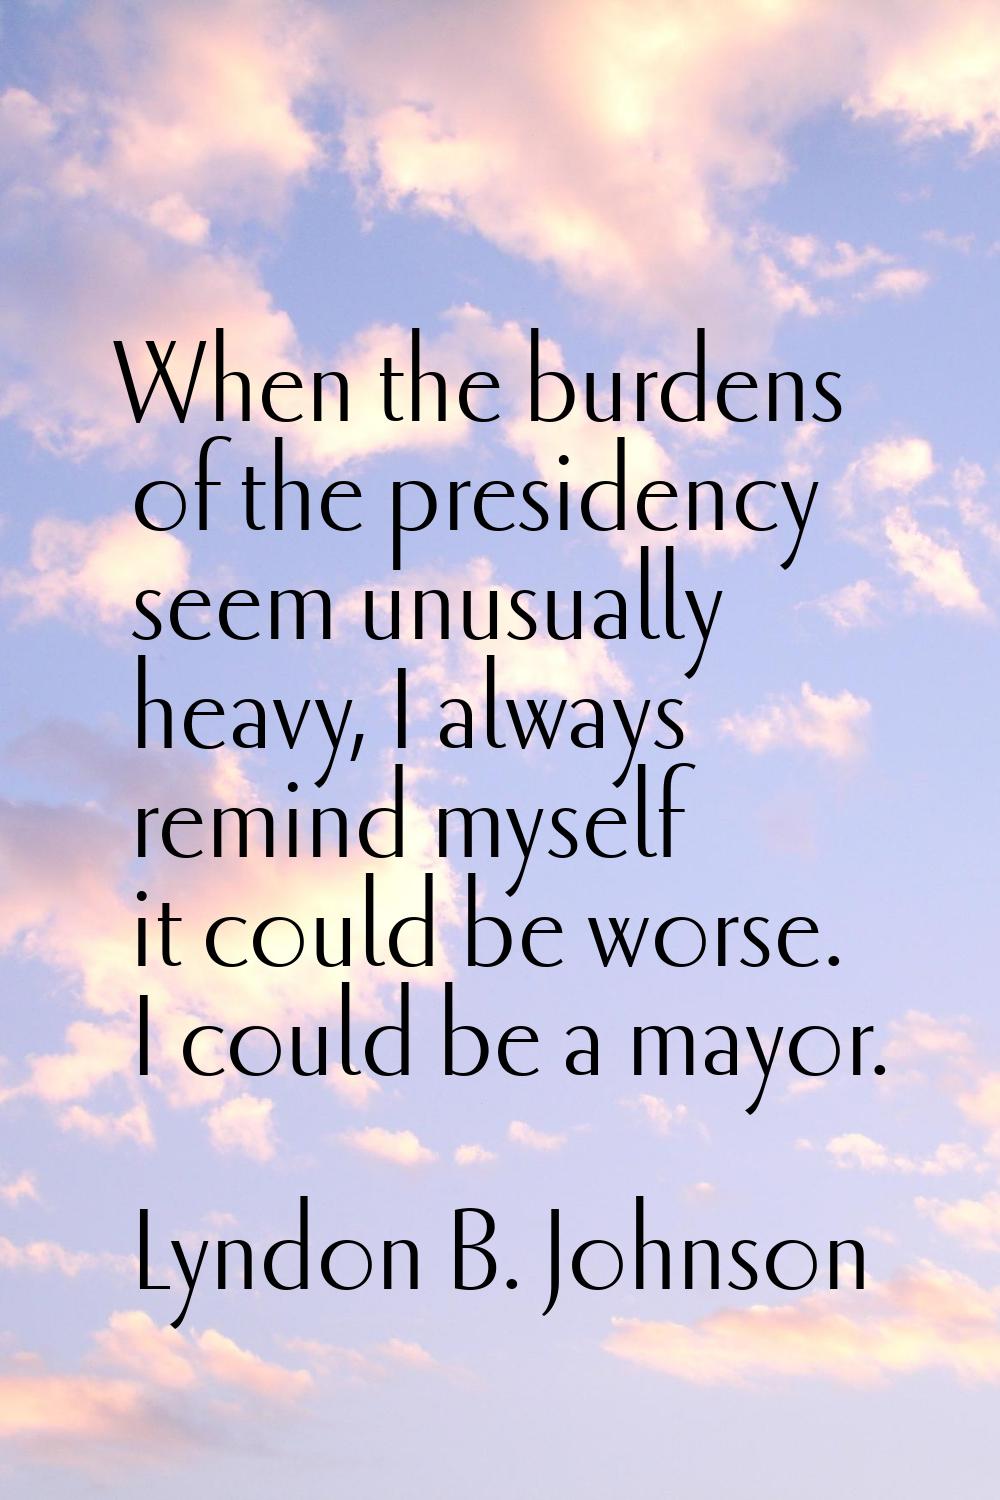 When the burdens of the presidency seem unusually heavy, I always remind myself it could be worse. 